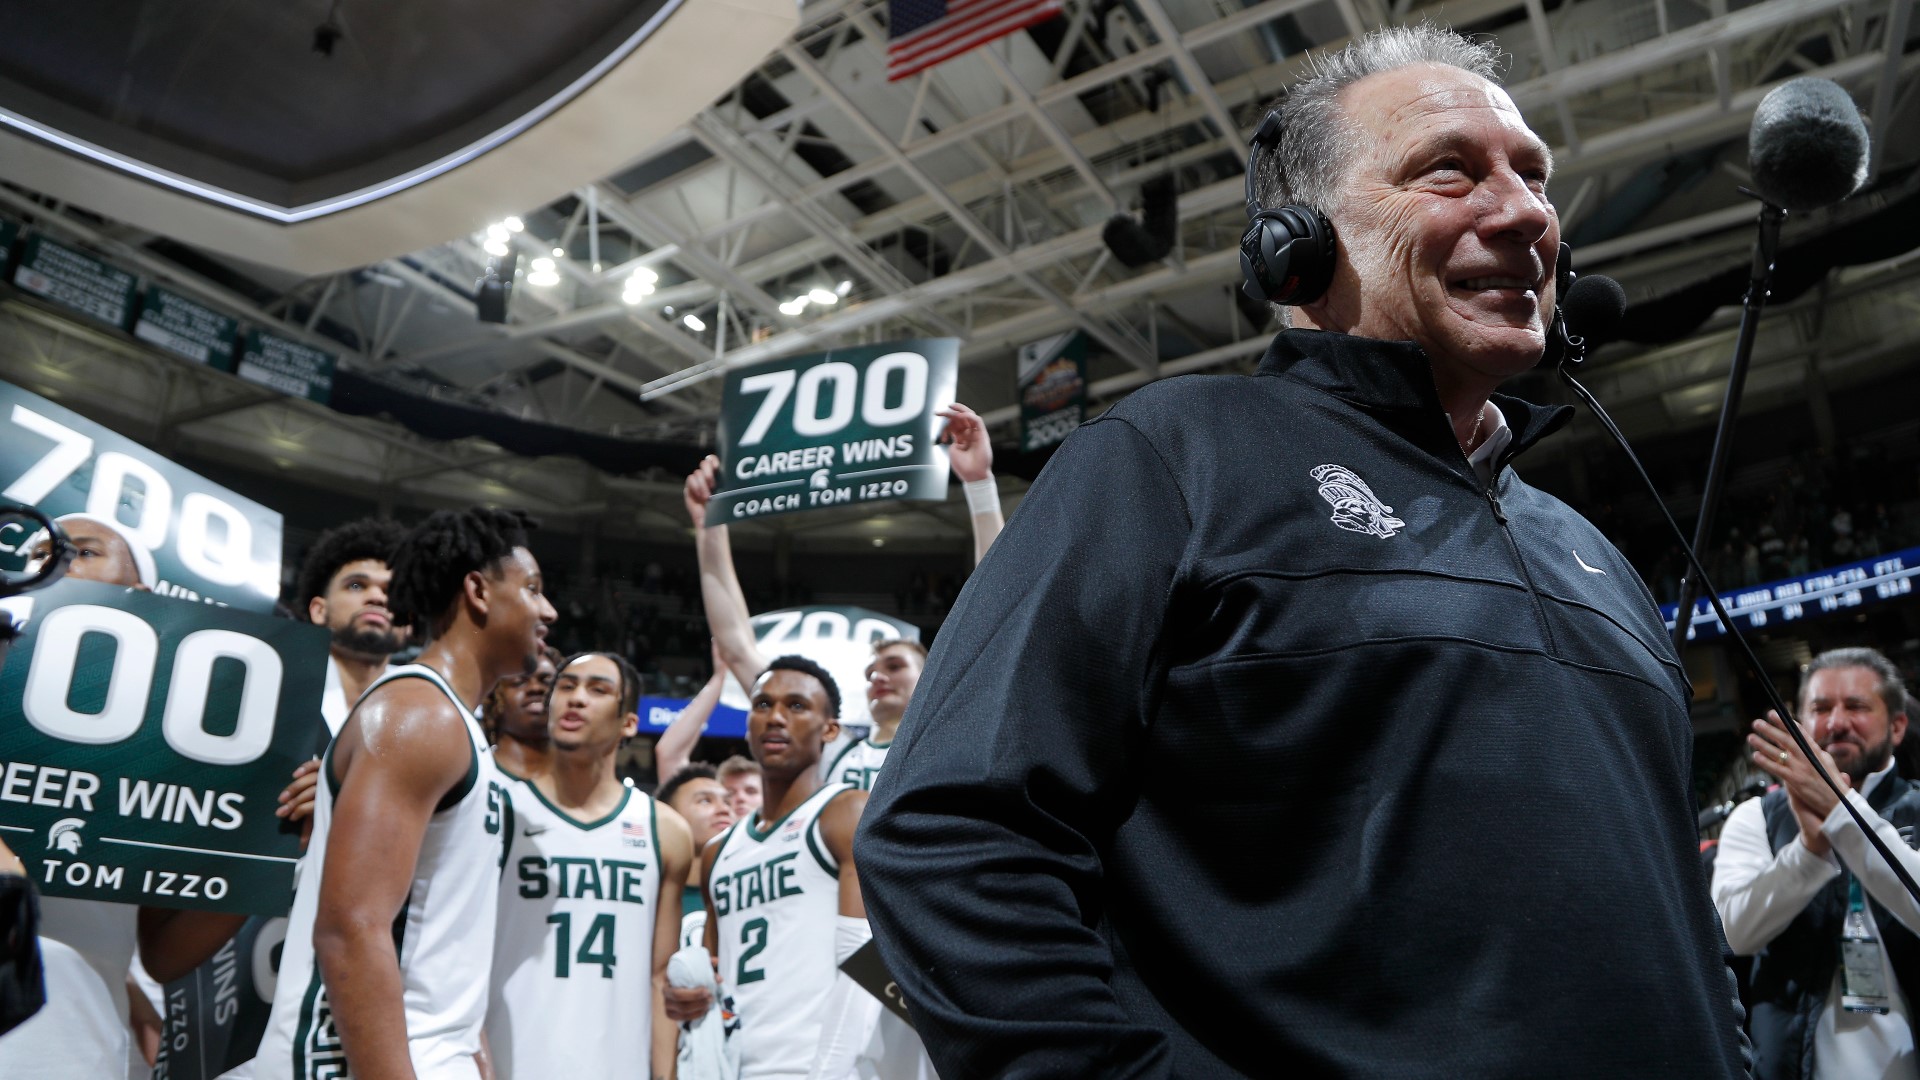 Izzo, who took the reins at Michigan State in 1995 for his first and only head coaching job, has 288 losses. He becomes the 38th men’s coach to accomplish the feat.